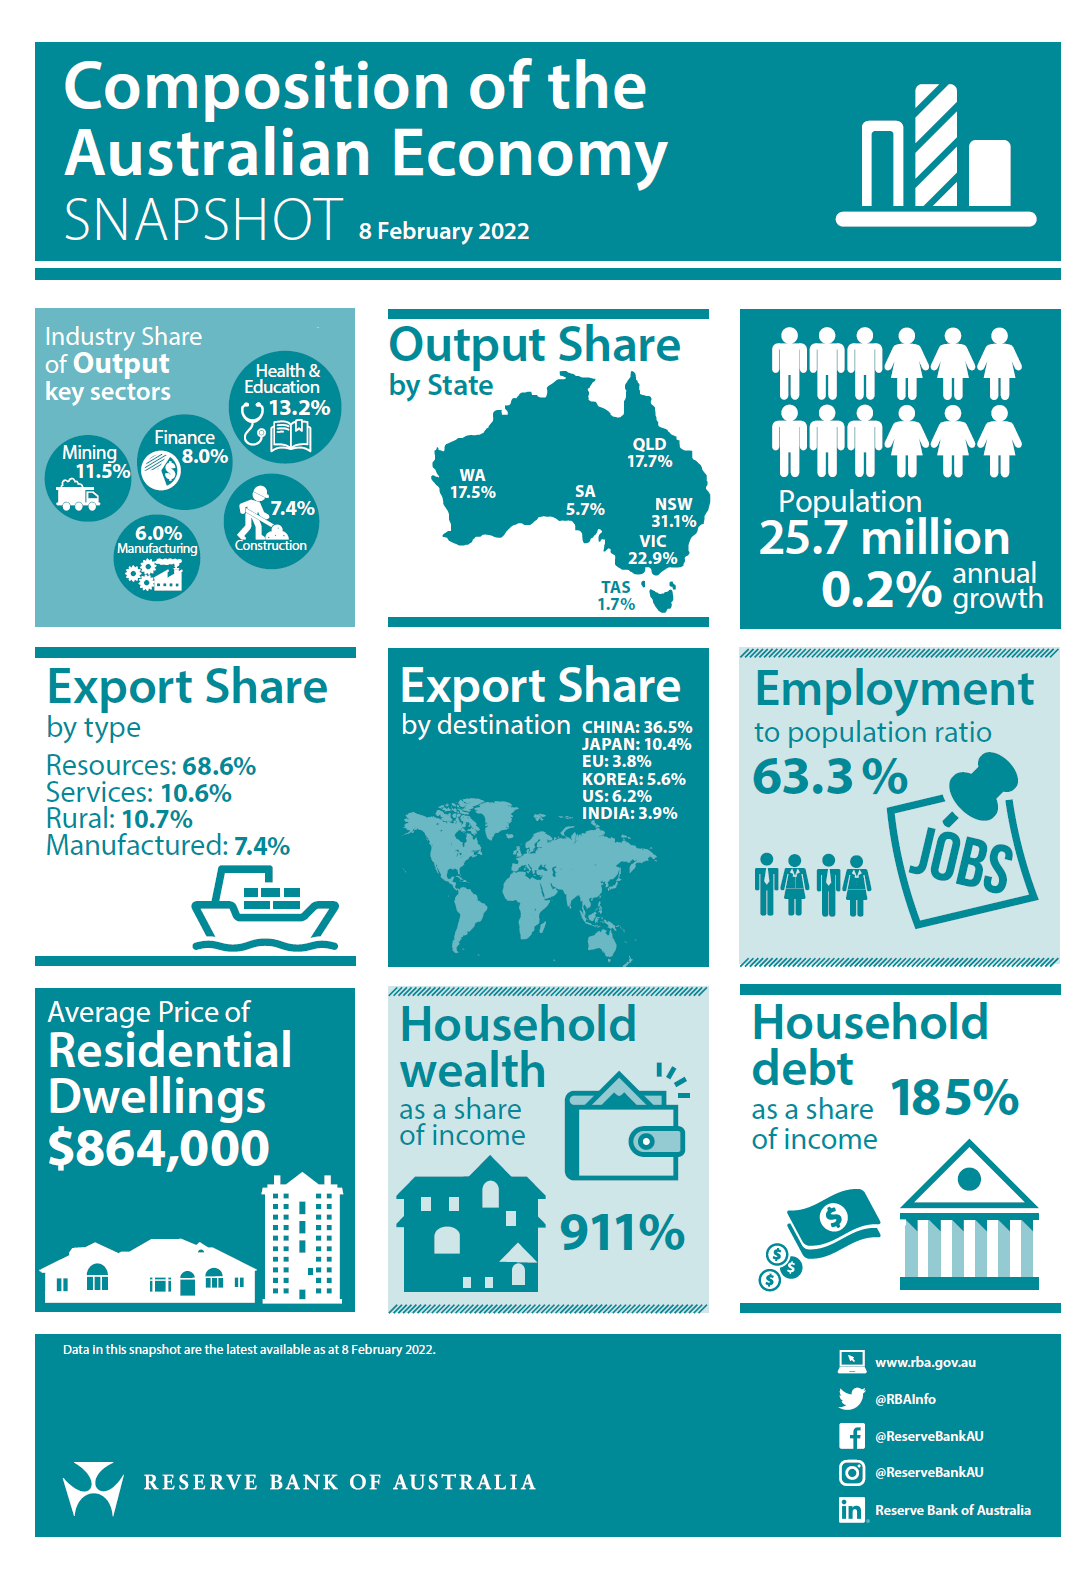 The Composition and Key Indicators of the Australian Economy